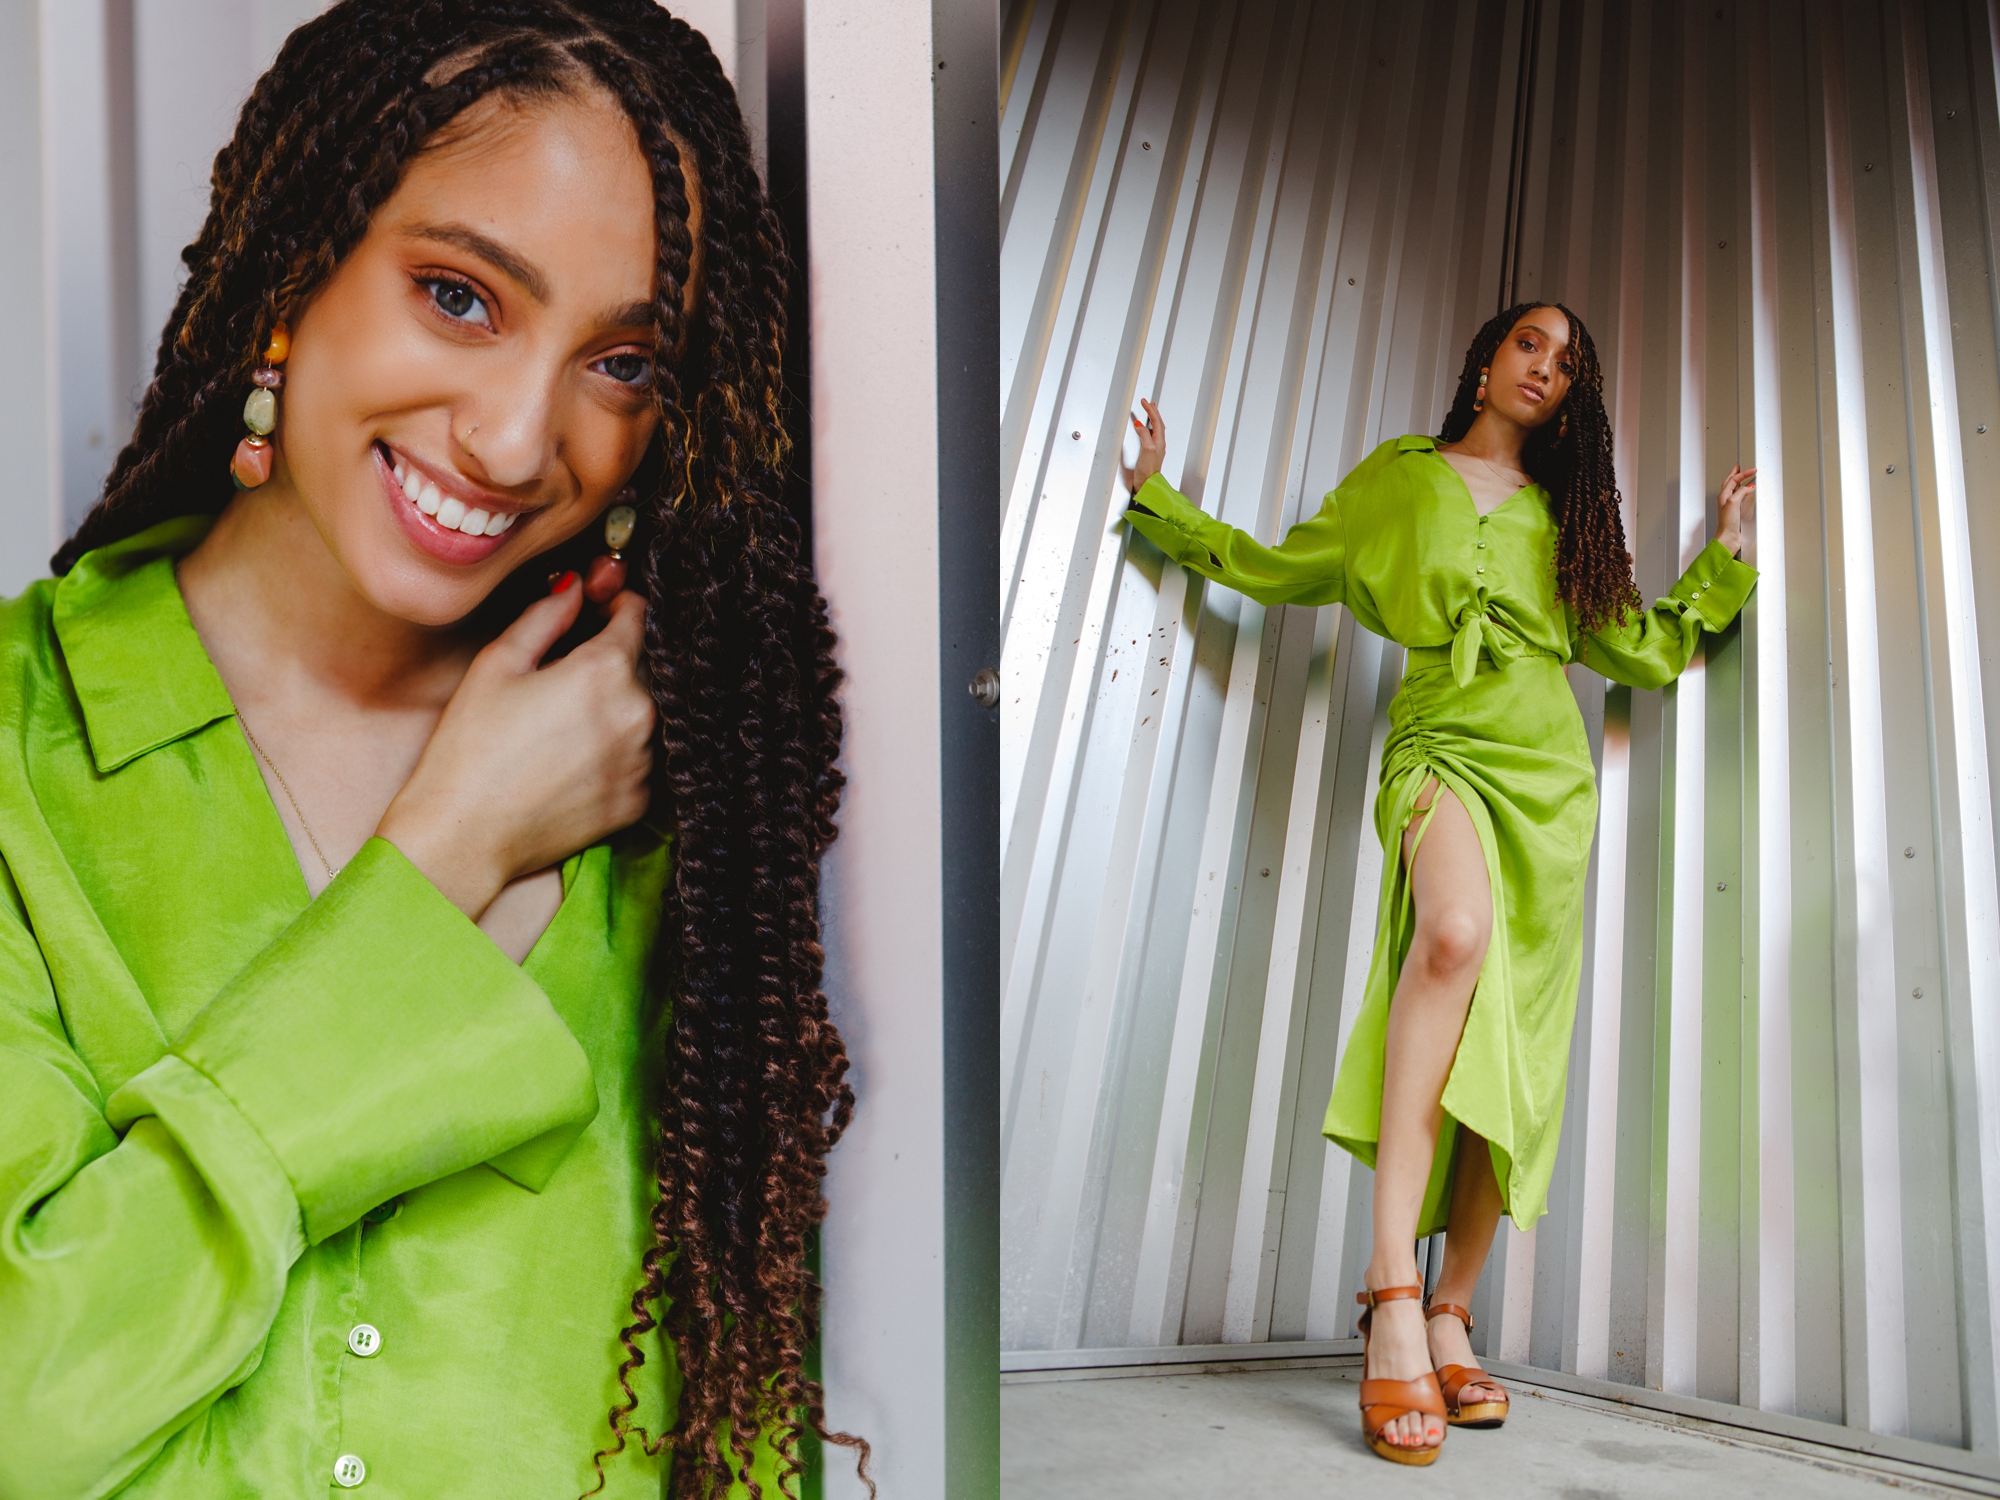 Alize poses for her senior pictures in a lime green dress wearing braids